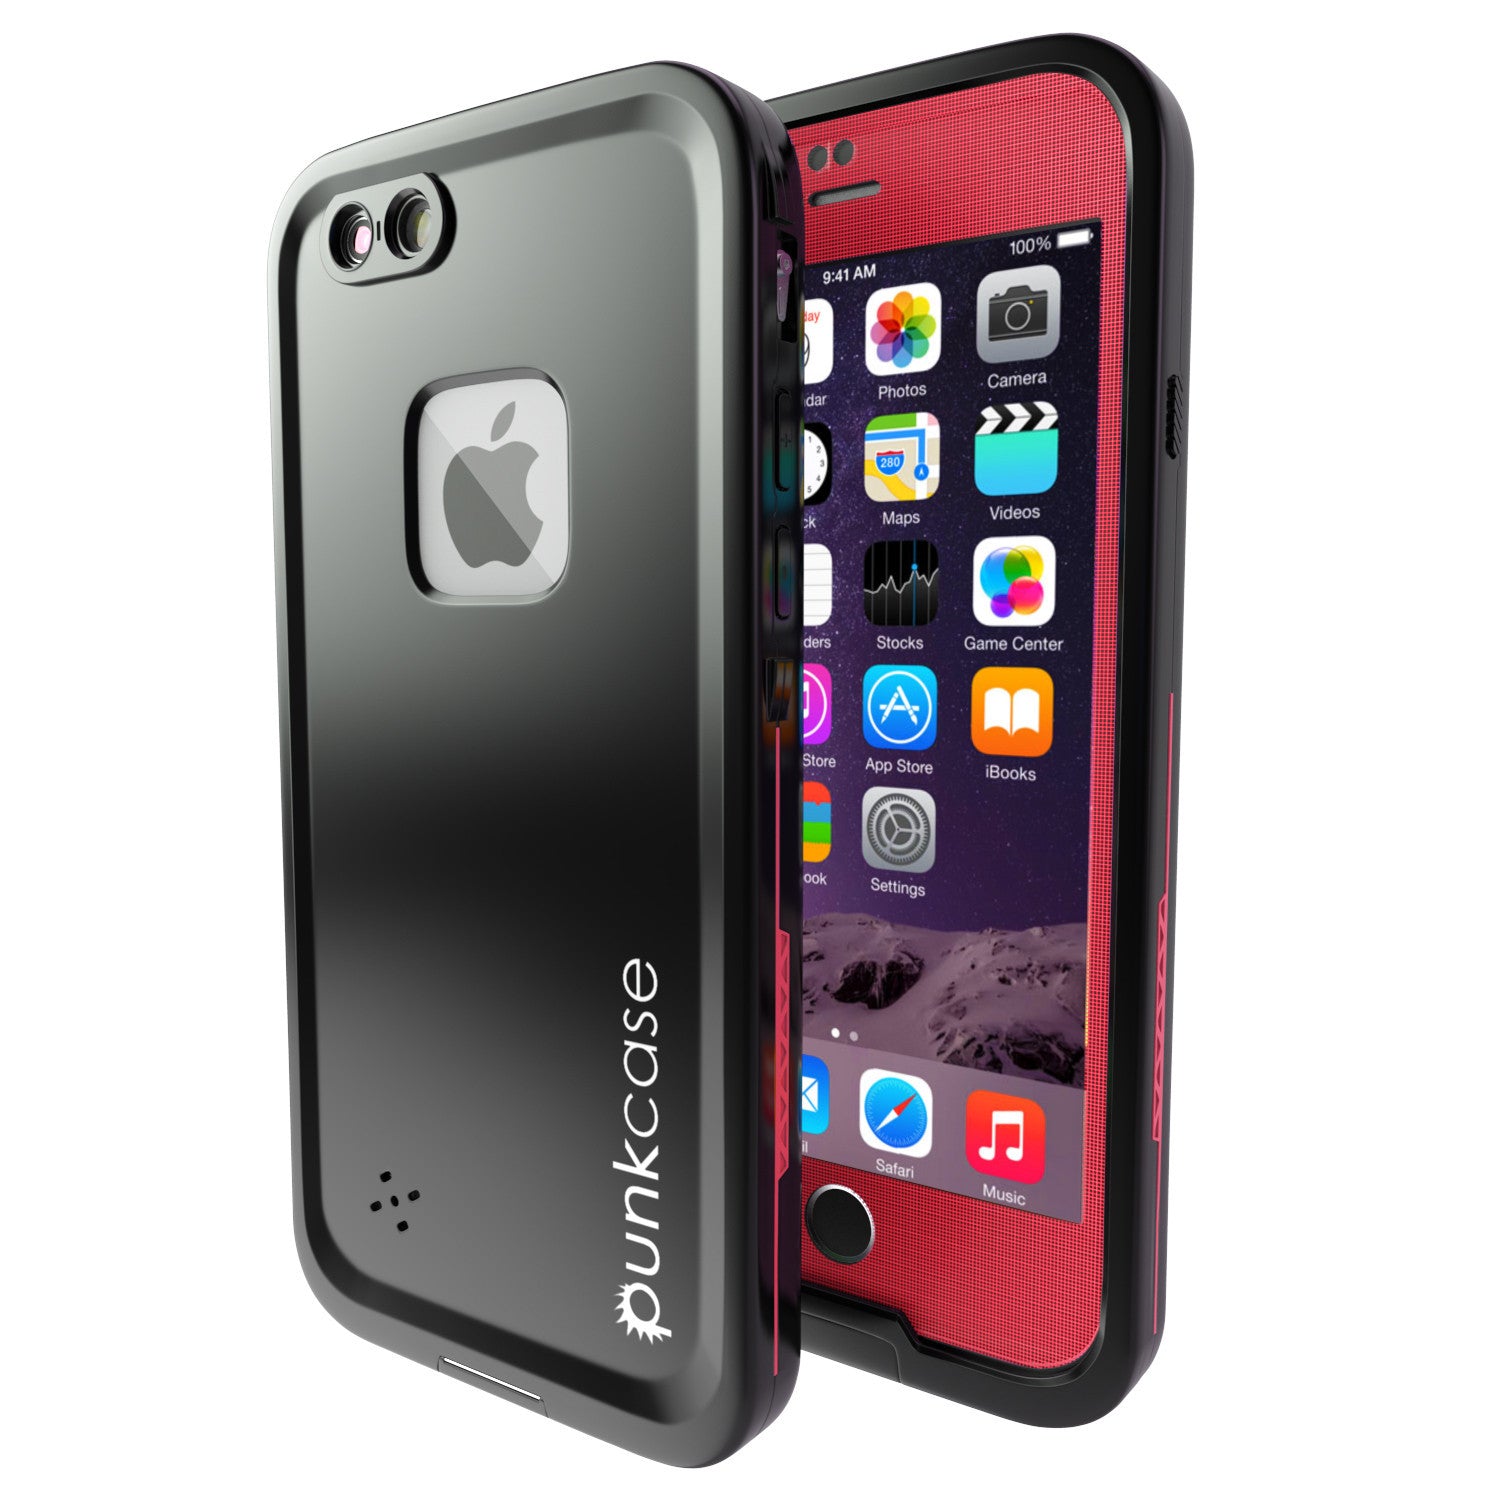 iPhone 6S+/6+ Plus Waterproof Case, Punkcase SpikeStar Red Thin Fit 6.6ft Underwater IP68 | Warranty (Color in image: red)